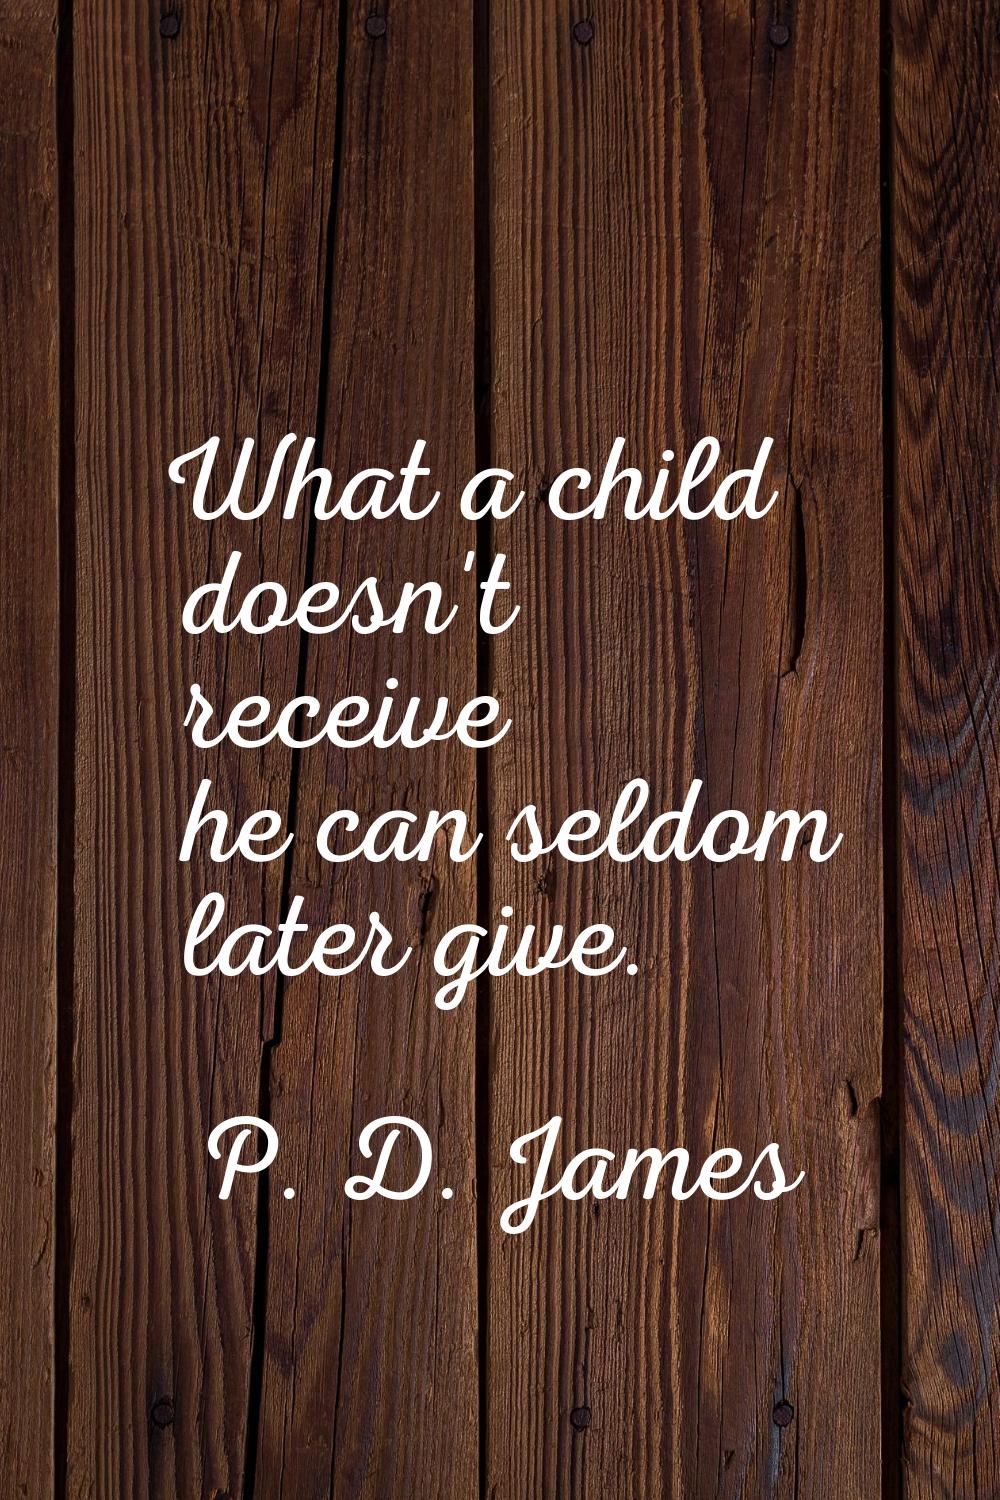 What a child doesn't receive he can seldom later give.